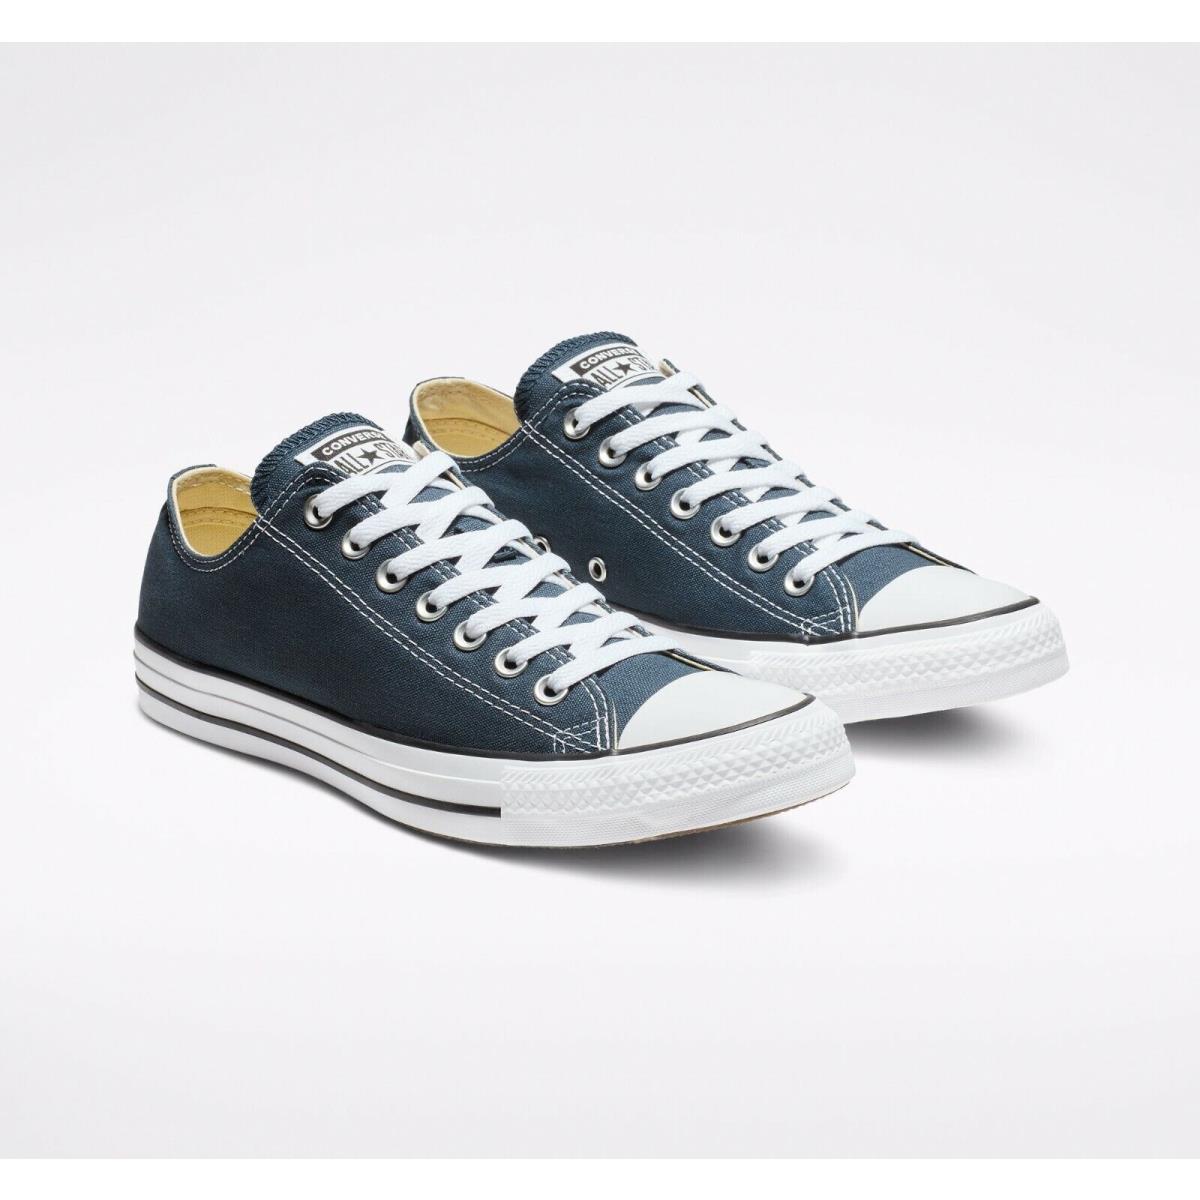 Converse Unisex Chuck Taylor All Star Low Top Sneaker Shoe Navy